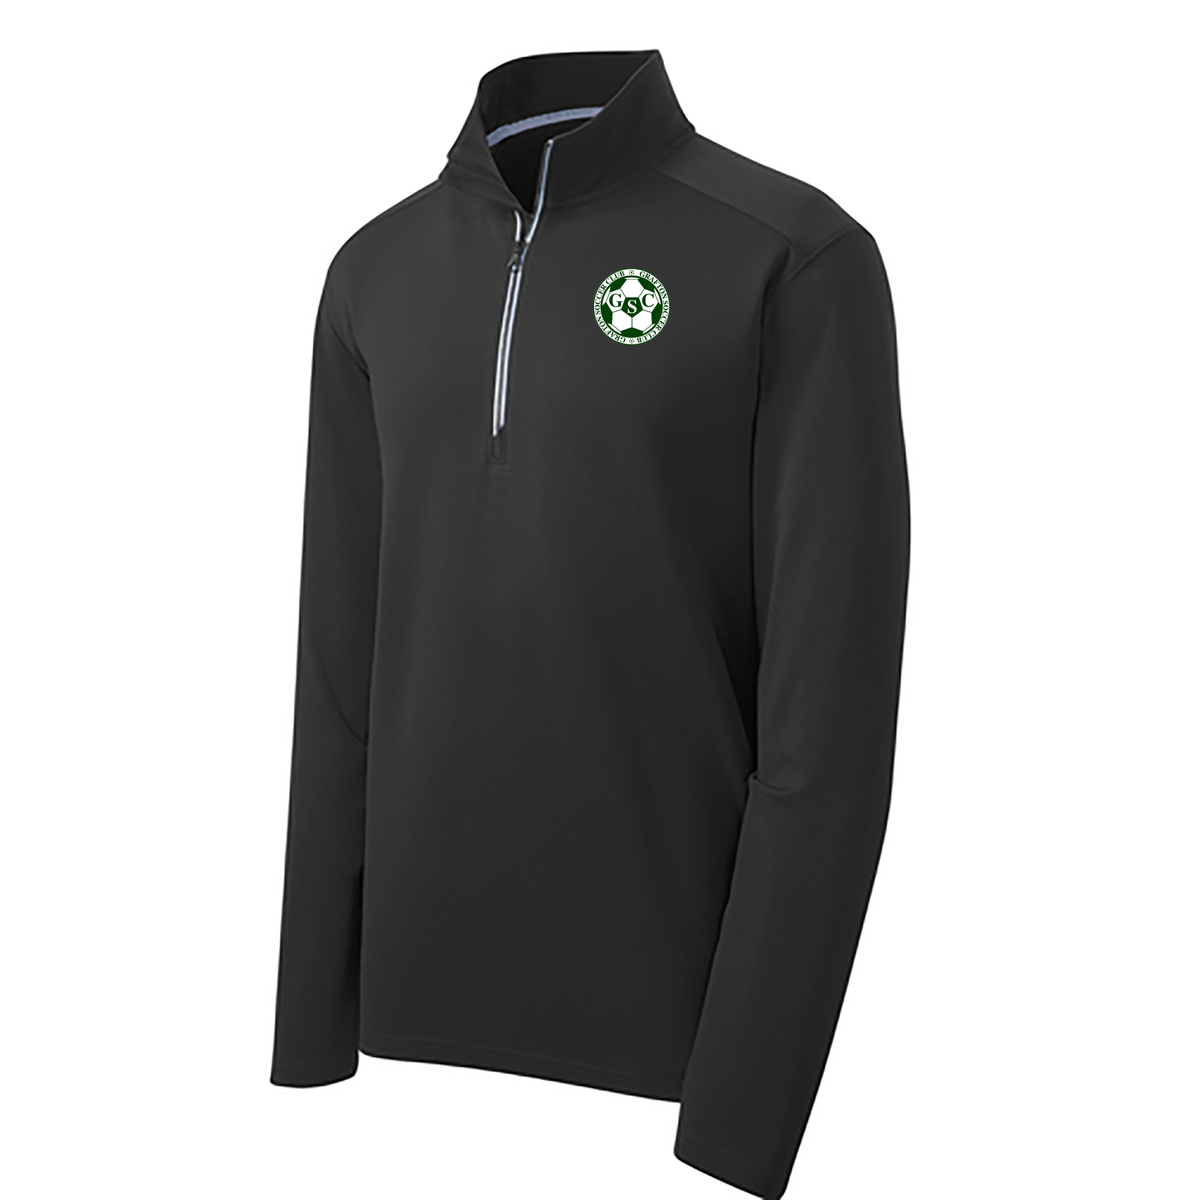 Grafton Youth Soccer Club Sport-Wick® Textured 1/4-Zip Pullover